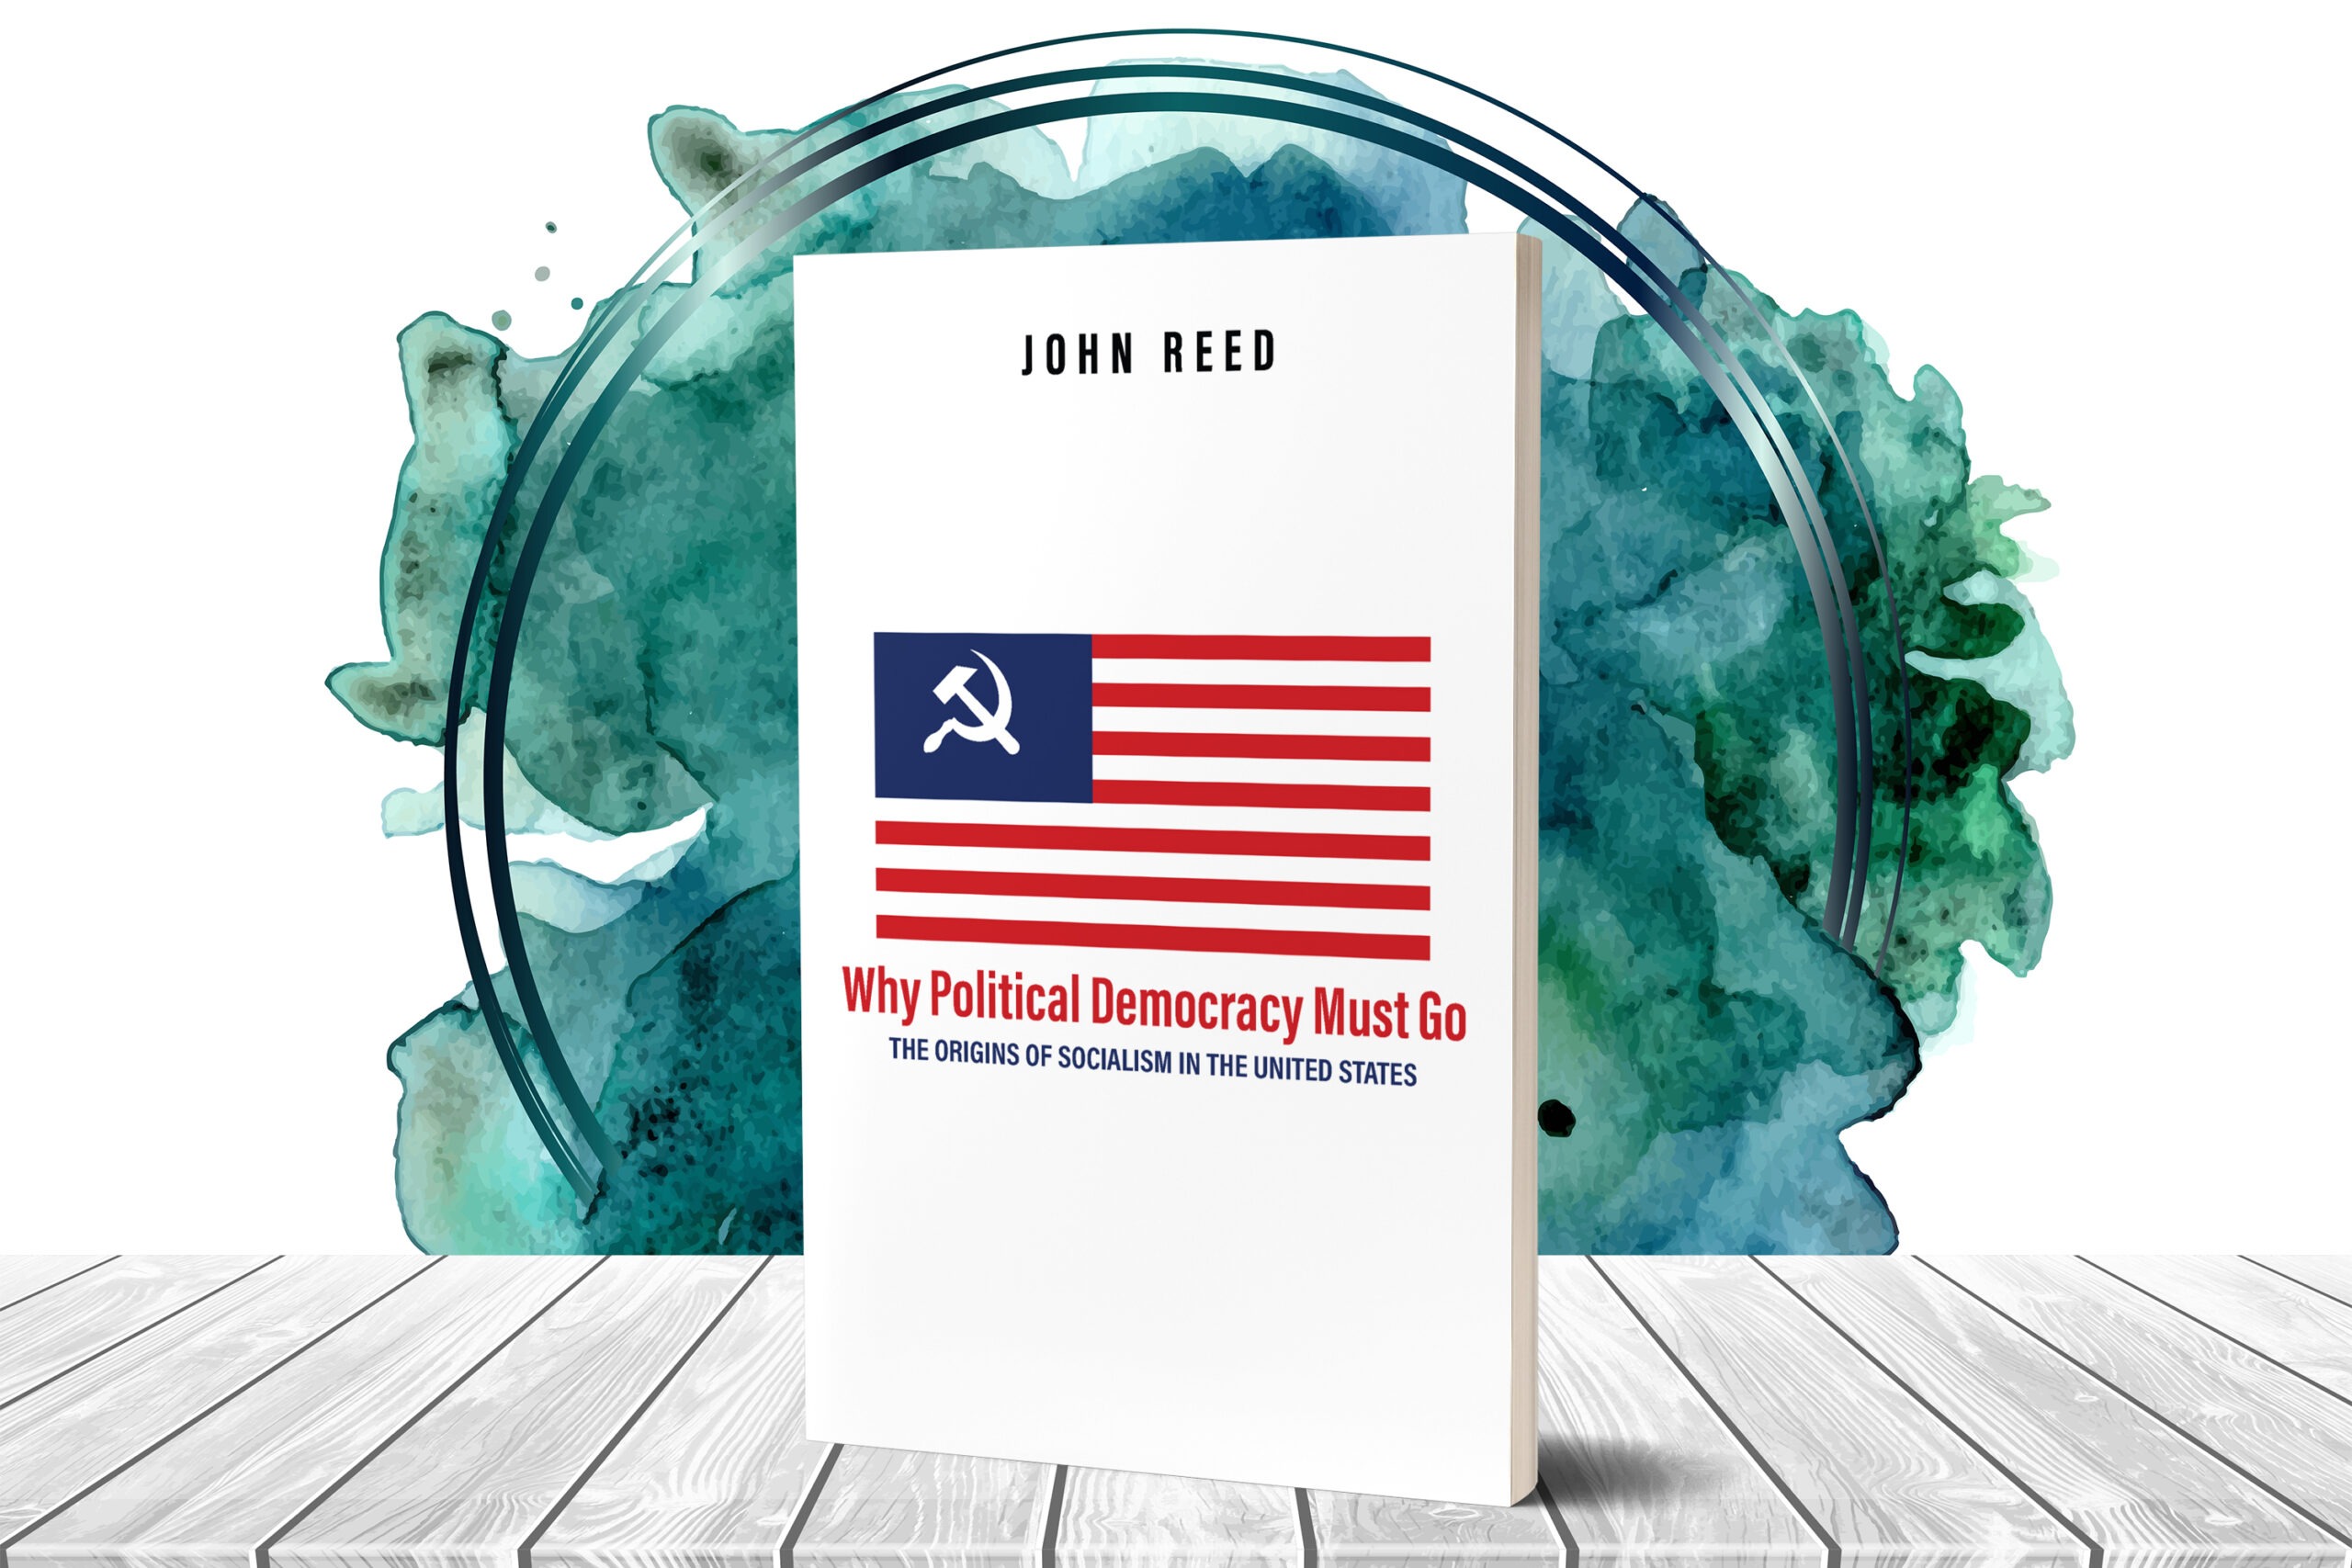 Why Political Democracy Must Go by John Reed now available from Histria Books